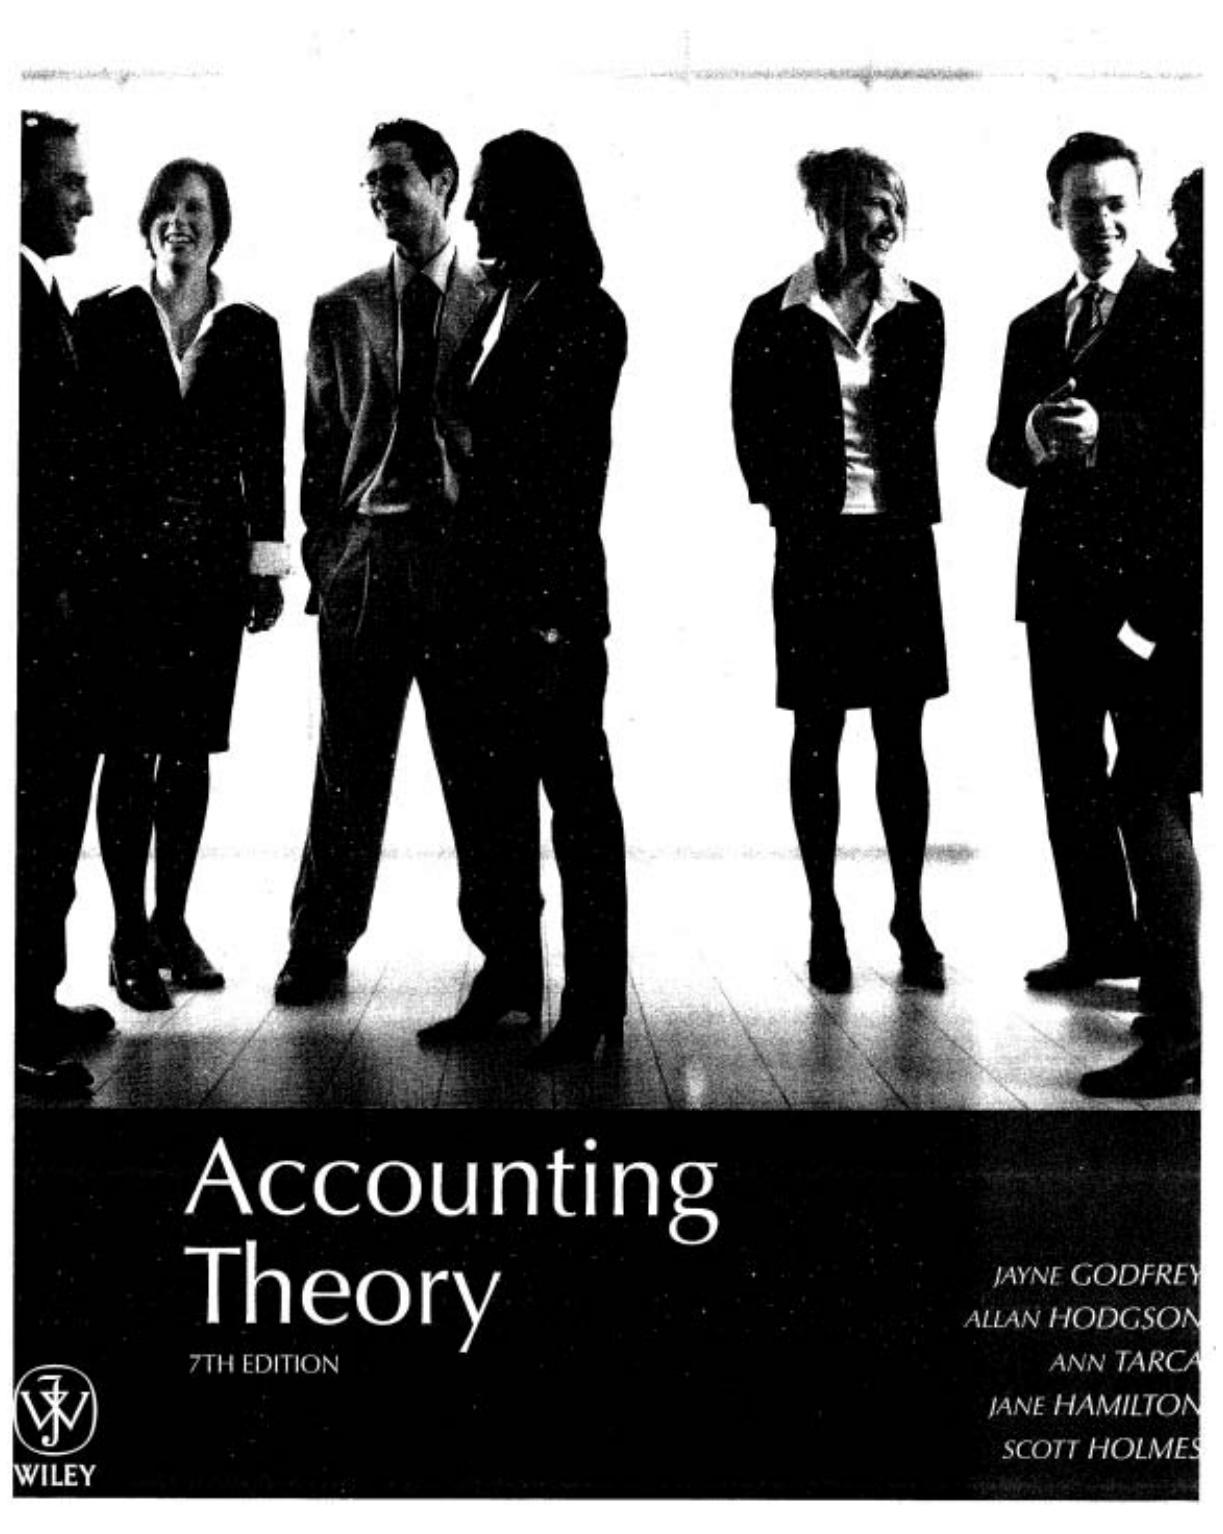 Accounting Theory 7th edition Isi1118592 2010